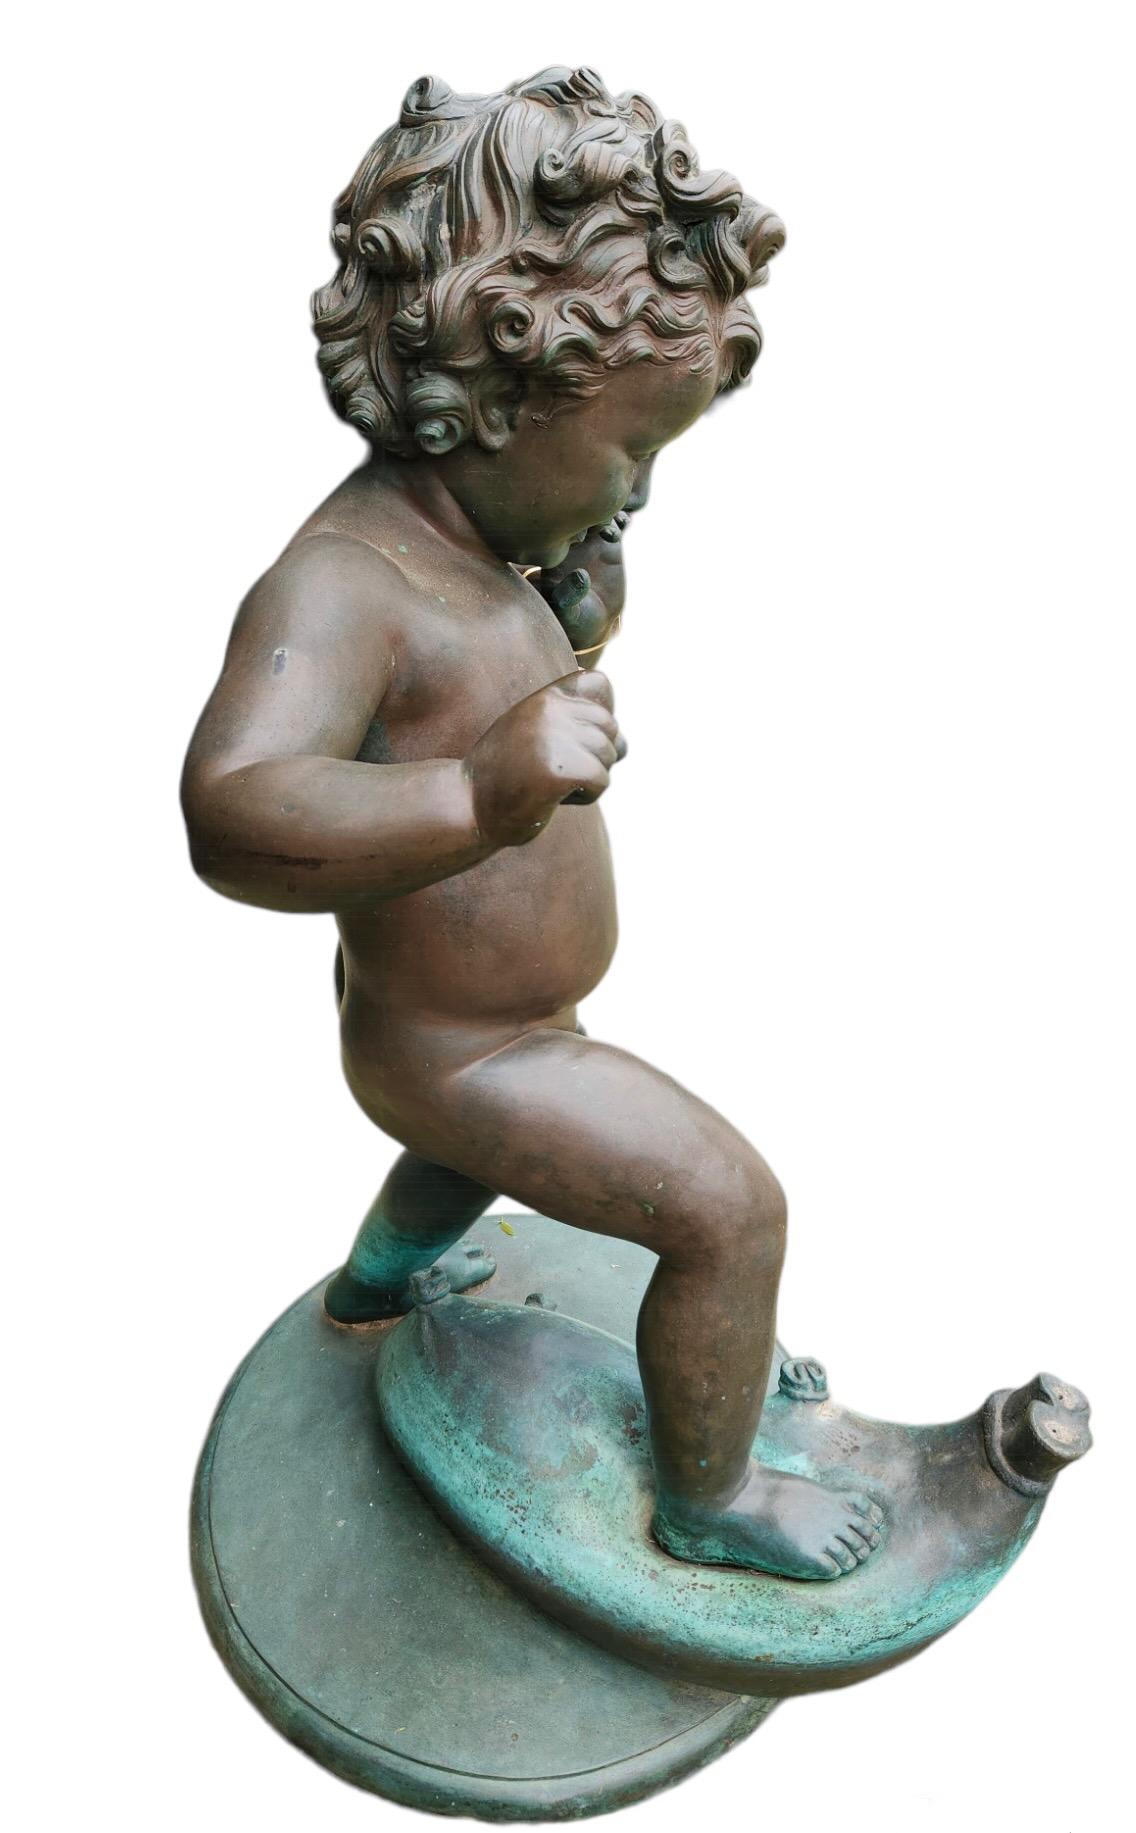 Vintage. Nicely cast statue of boy from a beautiful Bel-Air home in California. Nice patina. Can be converted to fountain.